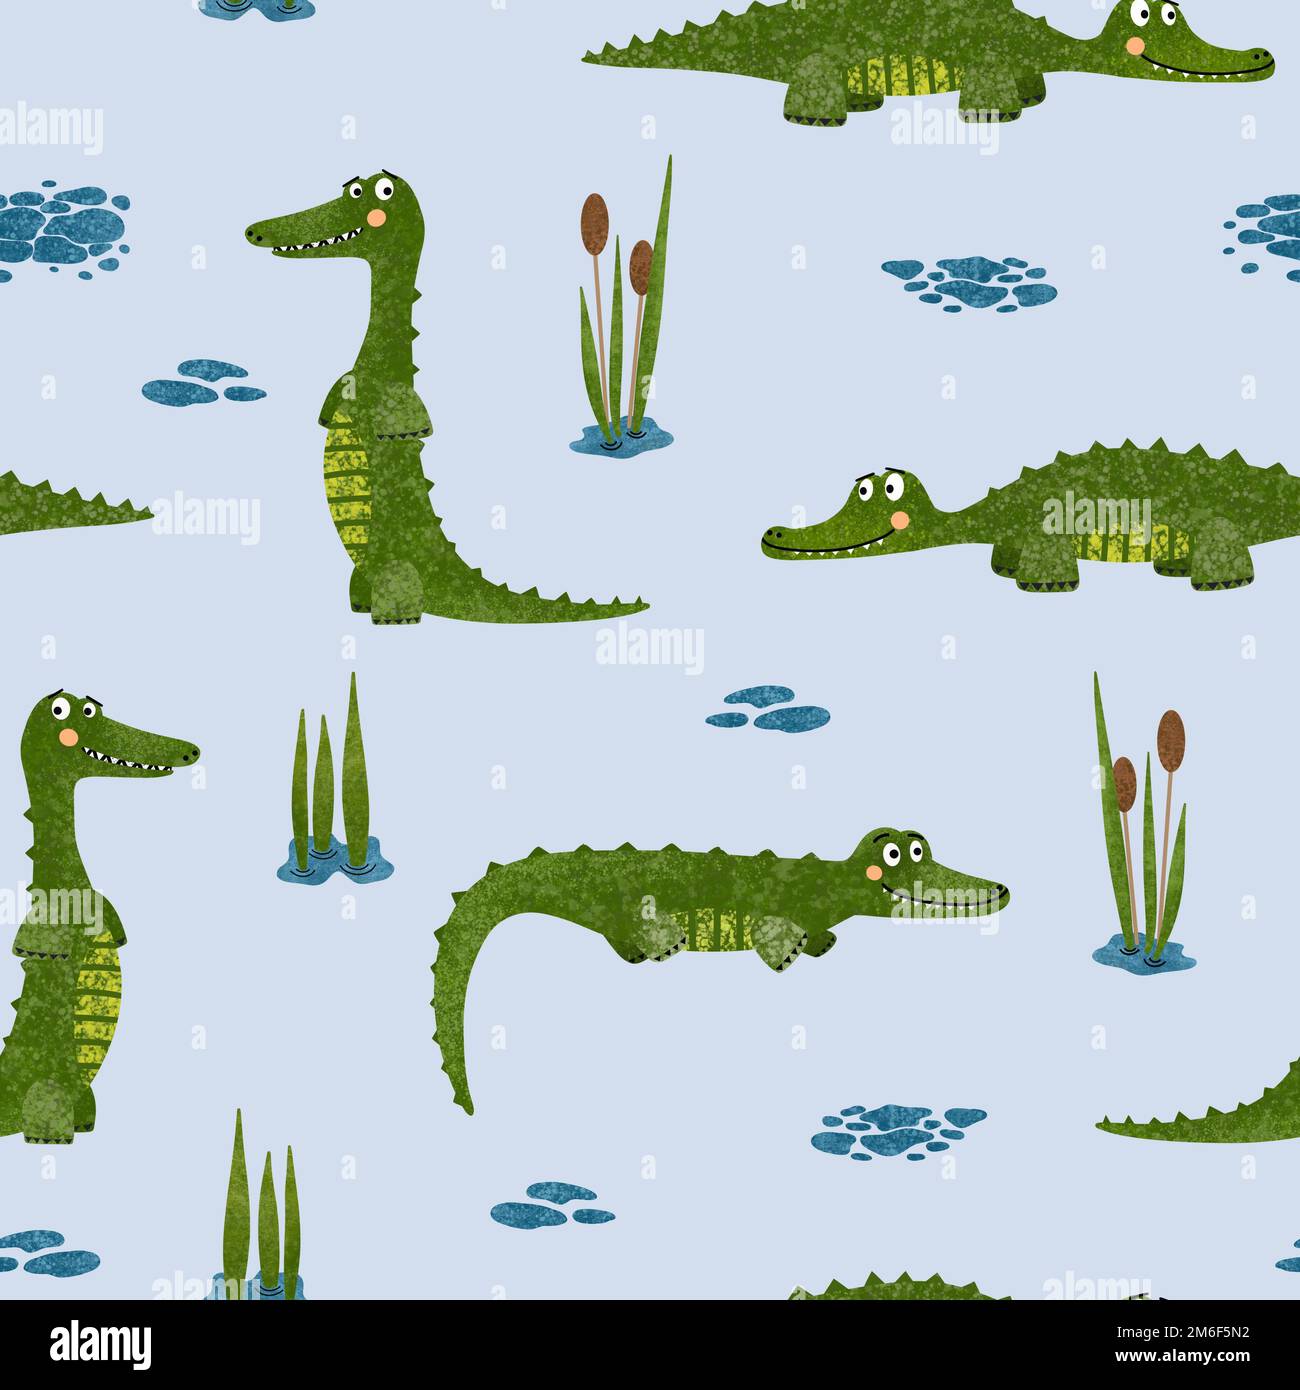 Funny crocodile seamless pattern. Textured hand drawn illustration with cute wild animals, water and plants on light blue background Stock Photo